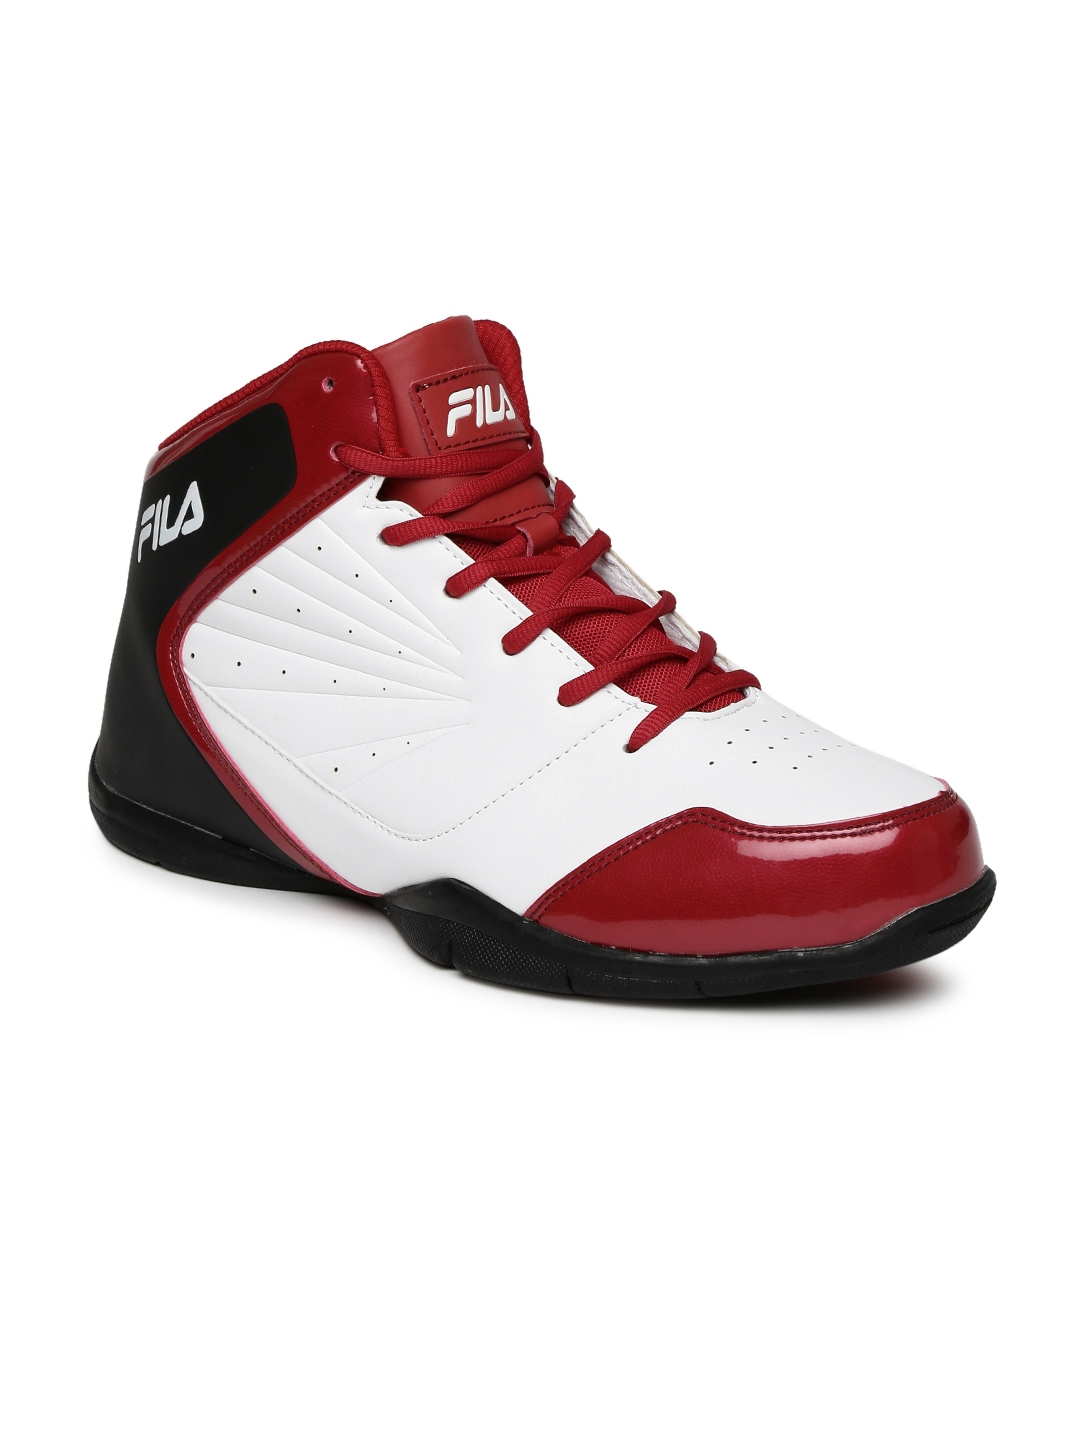 Buy FILA Men White & Red Colourblocked Basketball PLAYER High Top Shoes ...